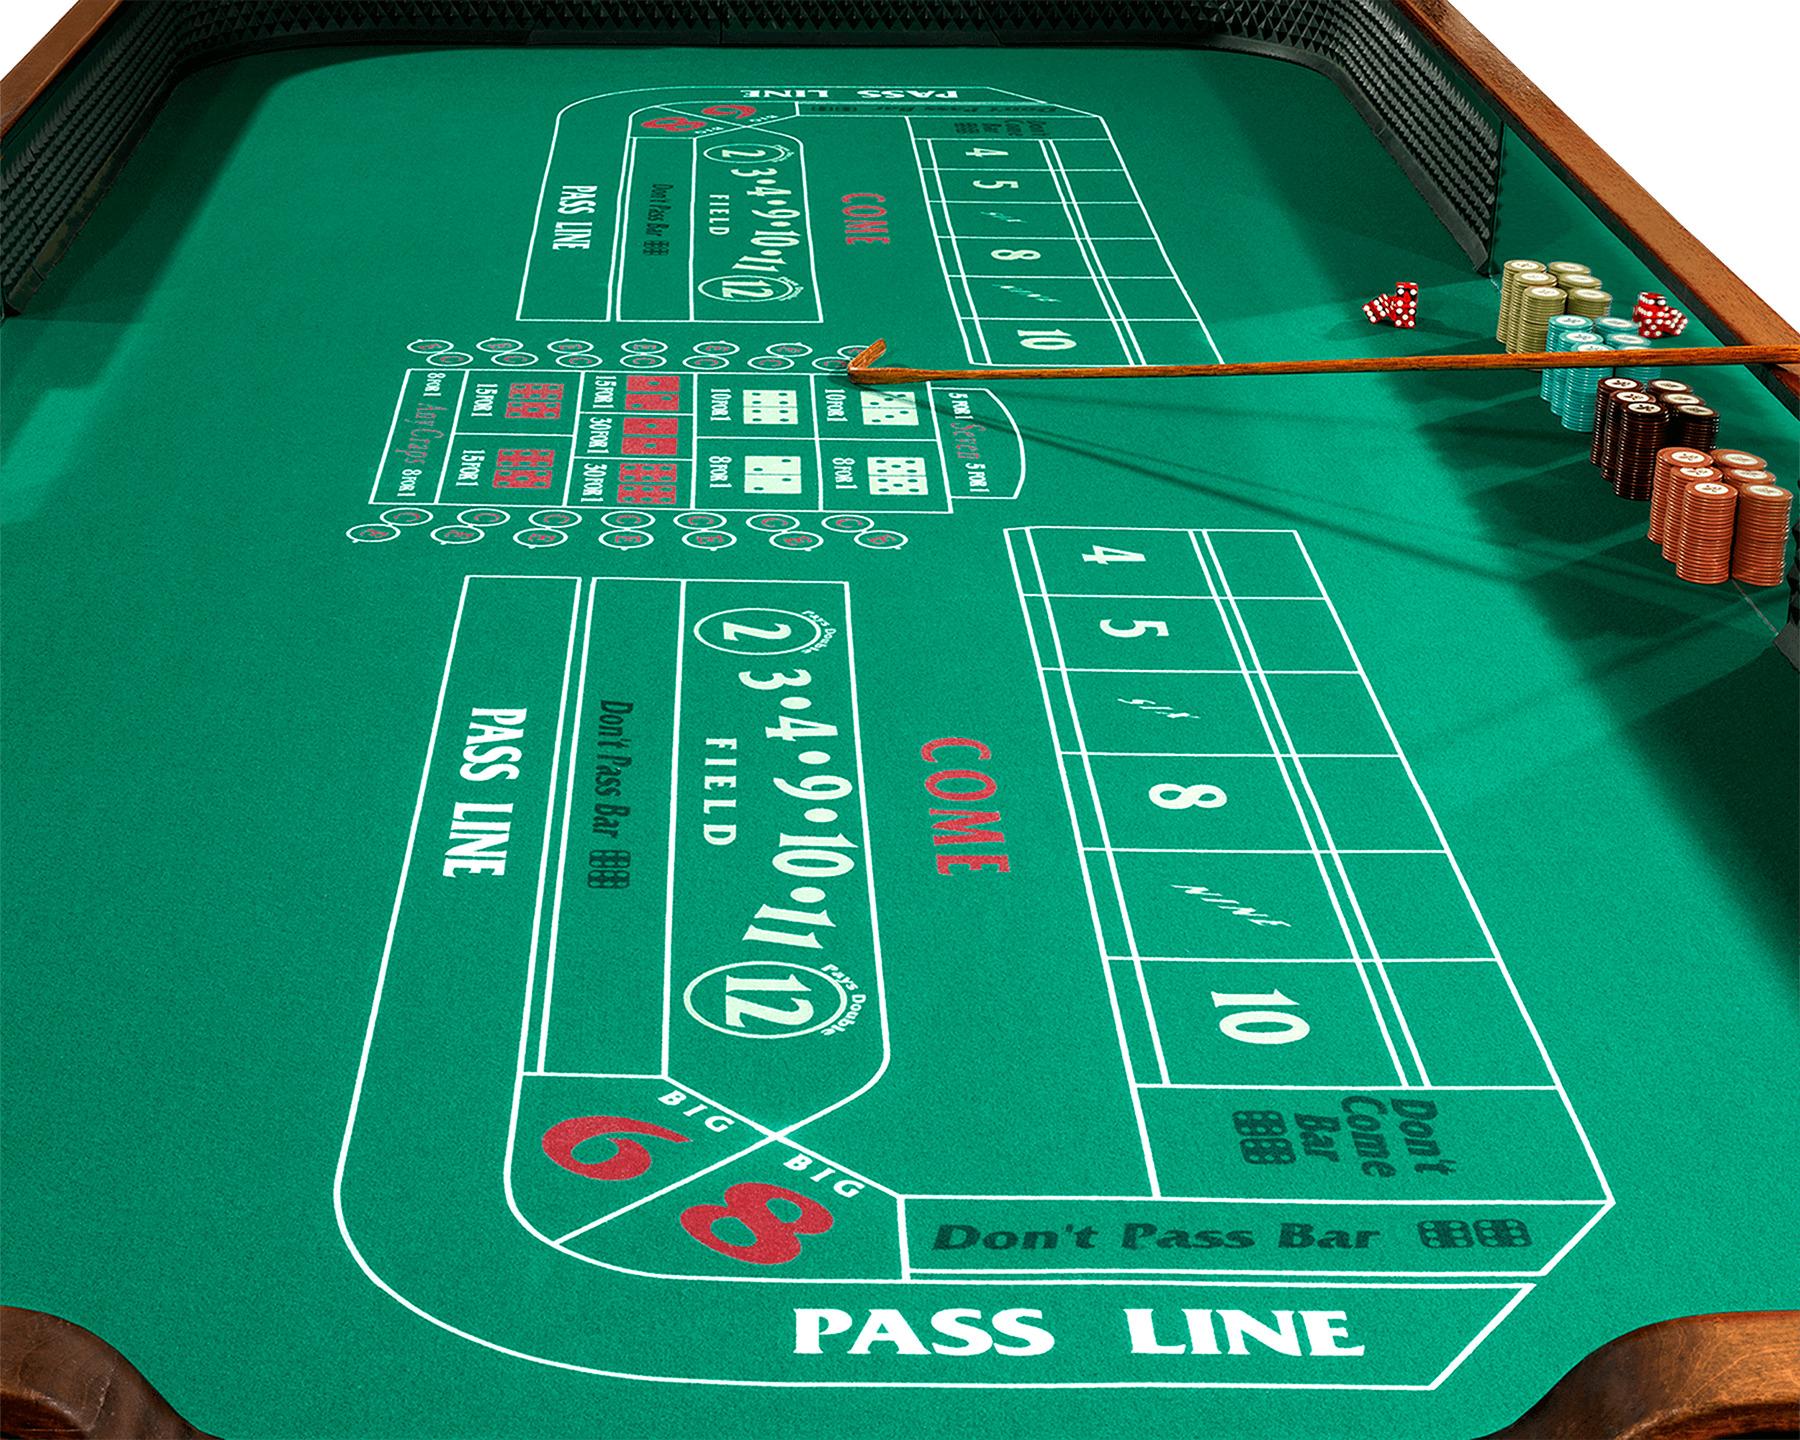 This historic craps table was once owned by the Beverly Country Club, an upscale night club in Metairie, Louisiana with a checkered past. Once one of the New Orleans area's most notorious — and fashionable — illegal casinos, the club claimed to have